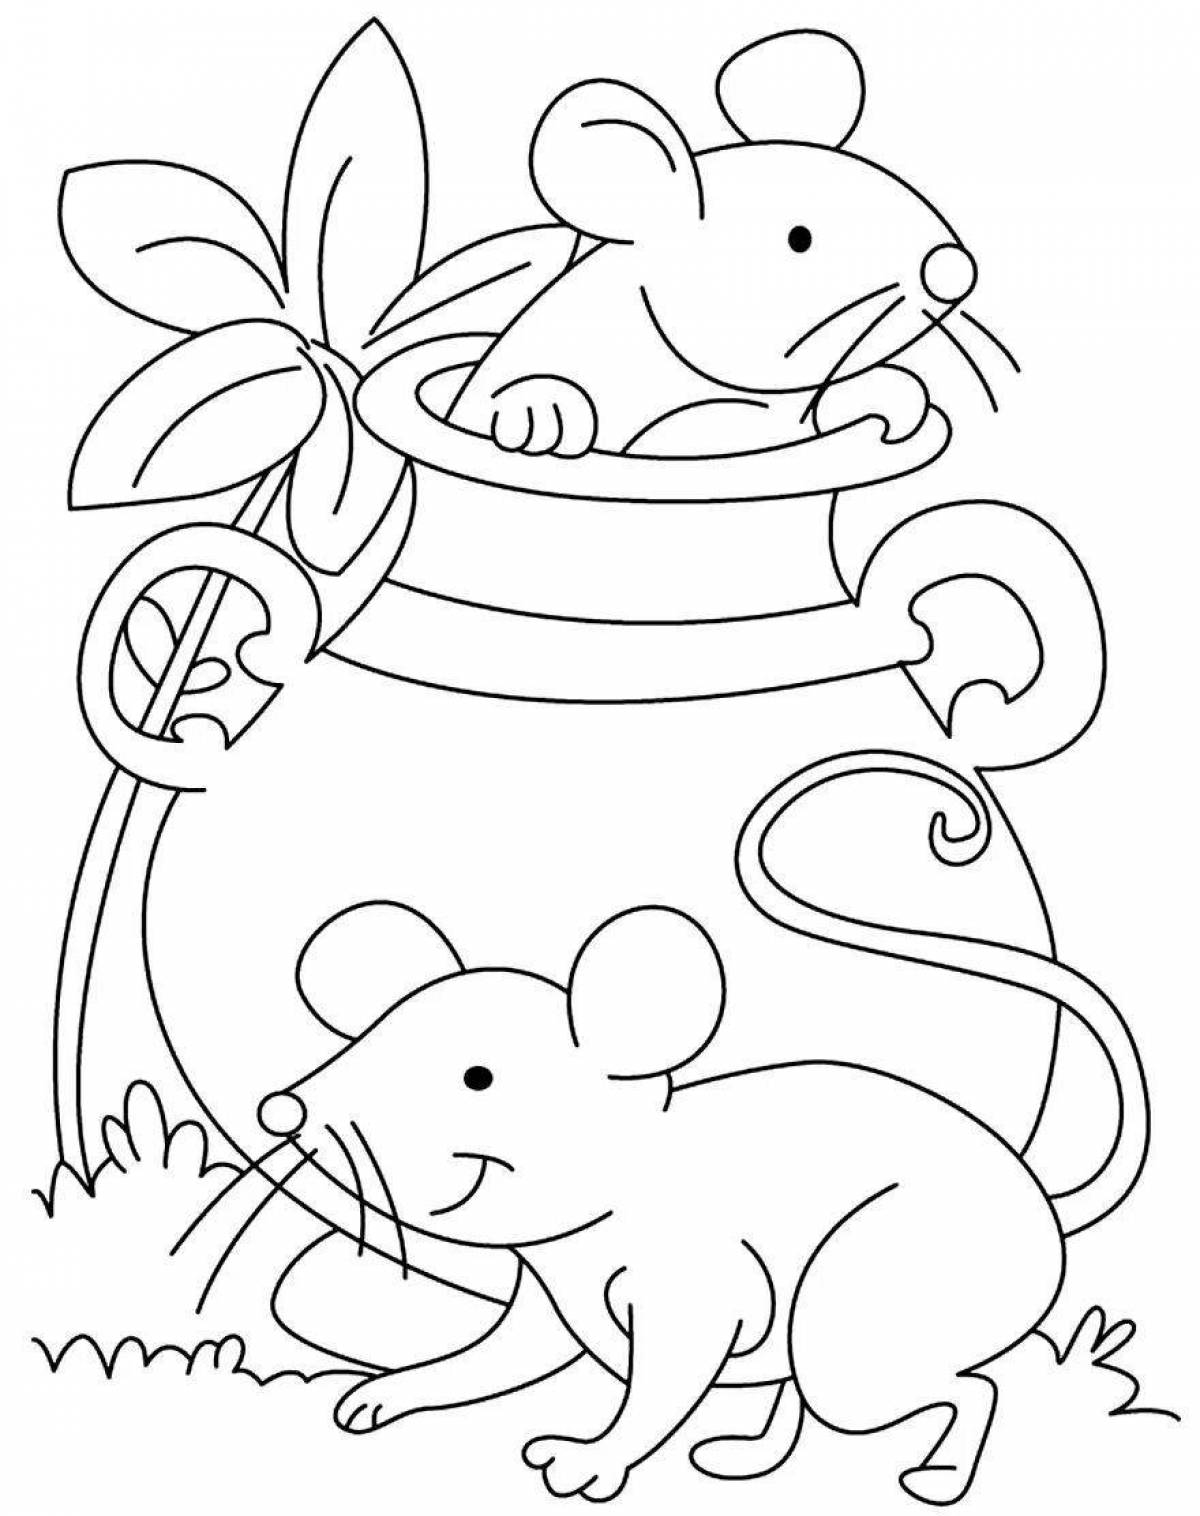 Merry mouse coloring book for 3-4 year olds